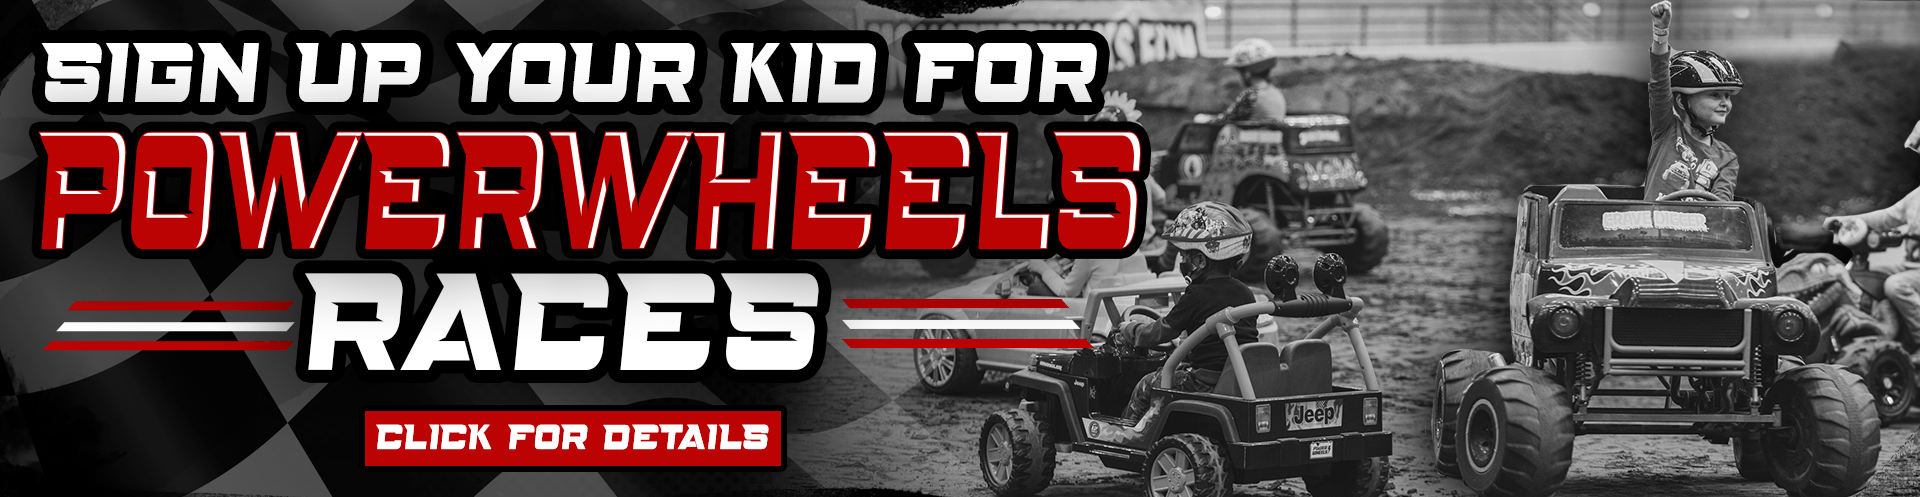 Sign up for Powerwheels Races